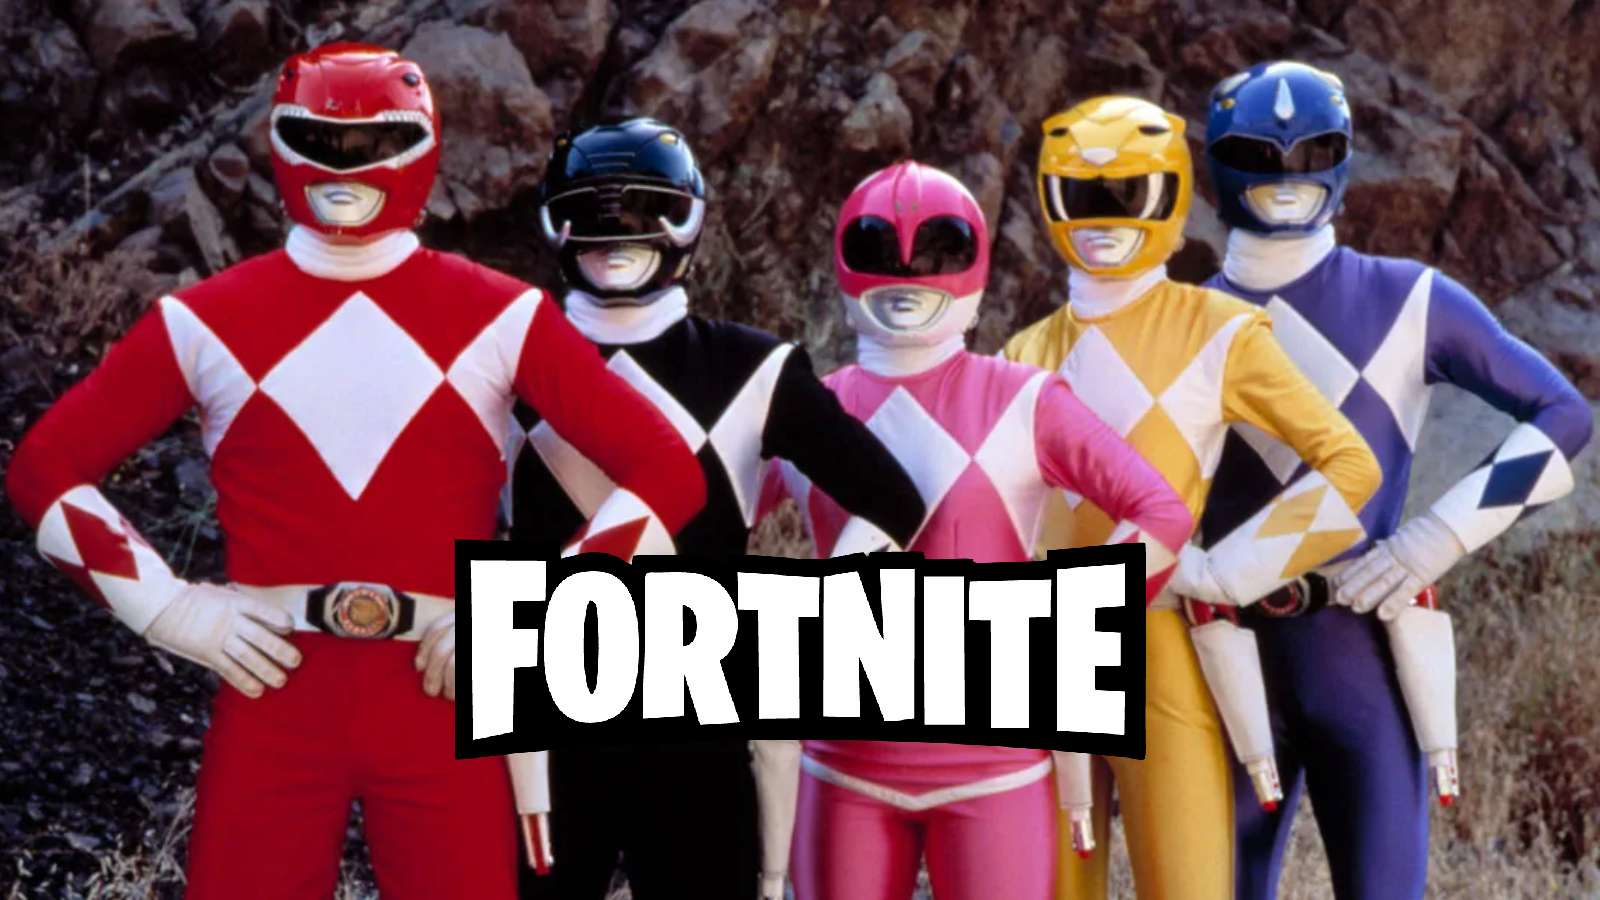 Fortnite's next big crossover rumored to be Mighty Morphin Power Rangers